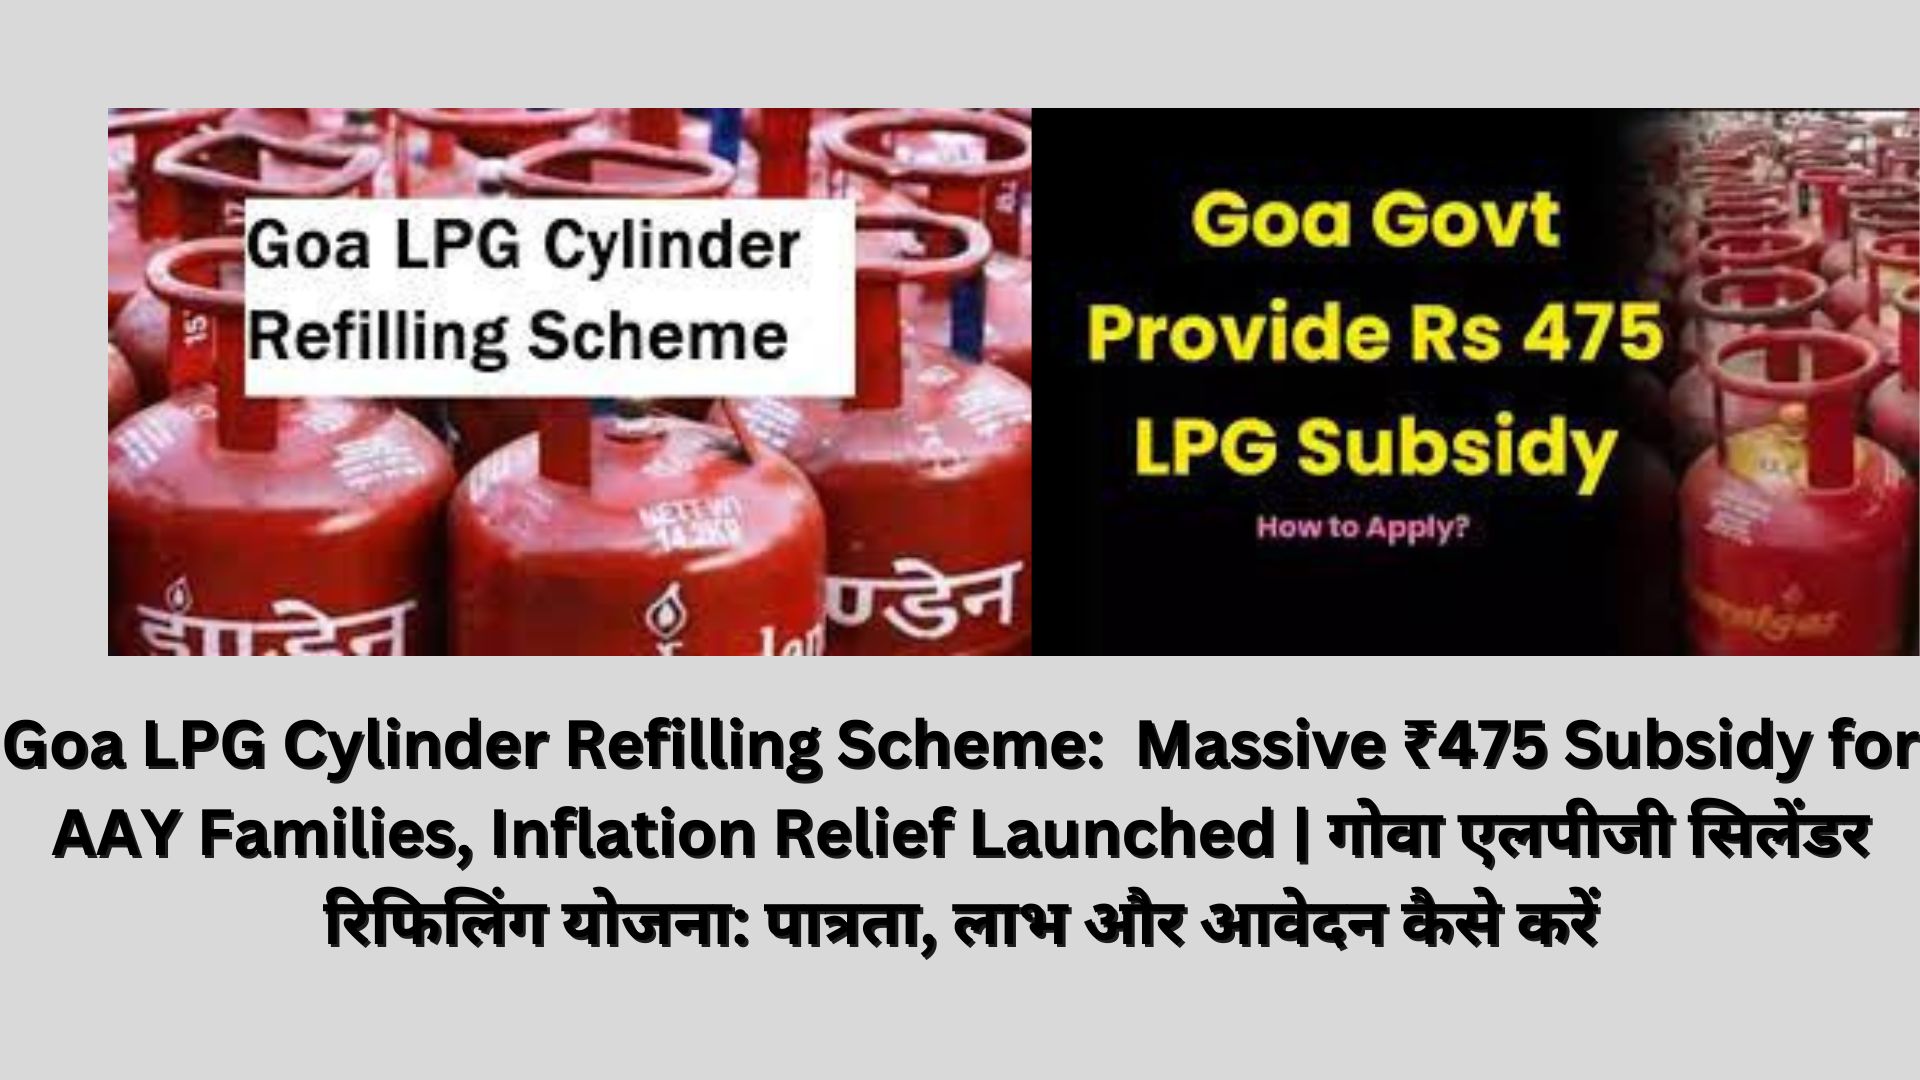 Goa LPG Cylinder Refilling Scheme: Massive ₹475 Subsidy for AAY Families, Inflation Relief Launched | गोवा एलपीजी सिलेंडर रिफिलिंग योजना: पात्रता, लाभ और आवेदन कैसे करें